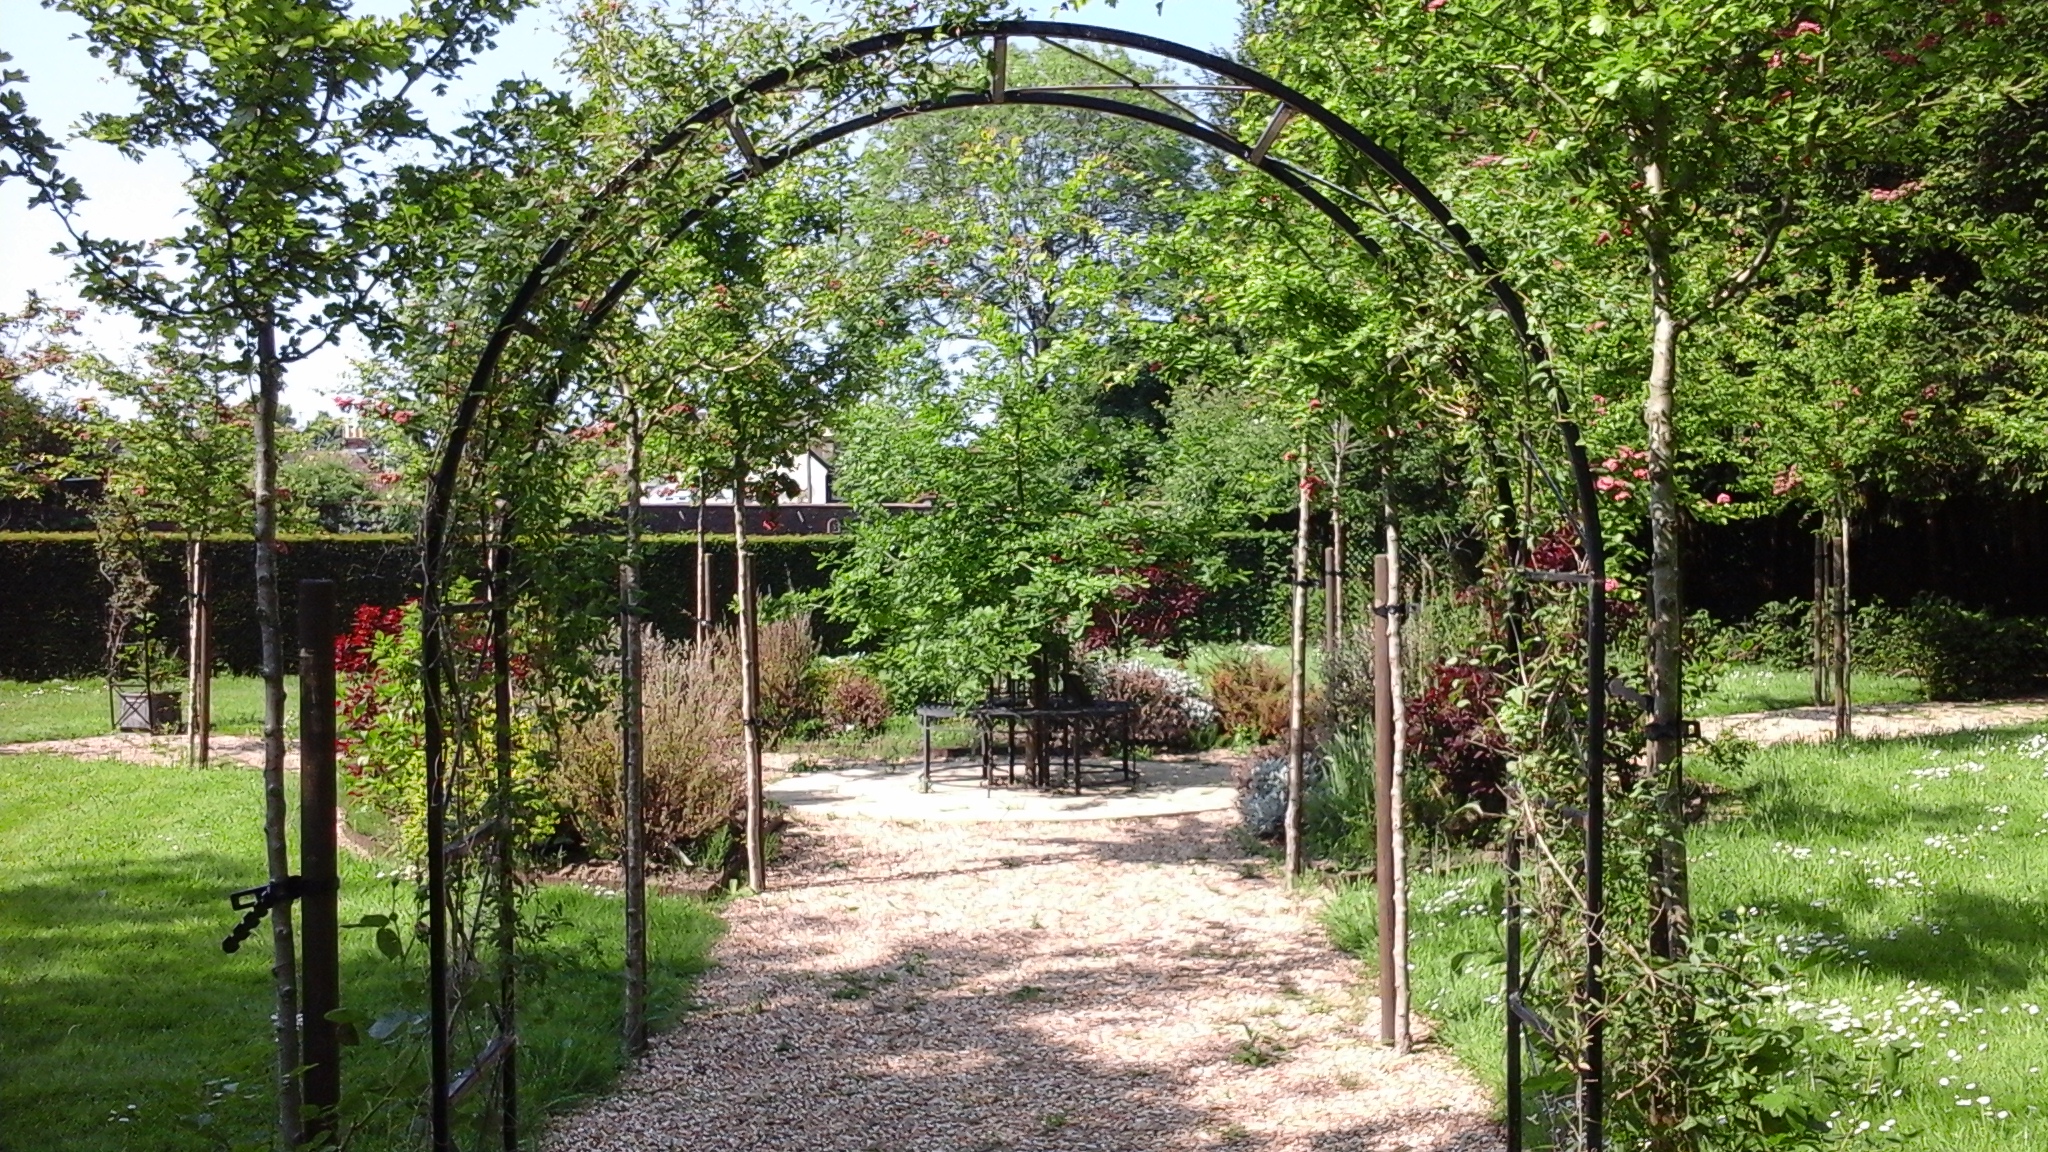 A view of the King's Garden through a metal rose arch